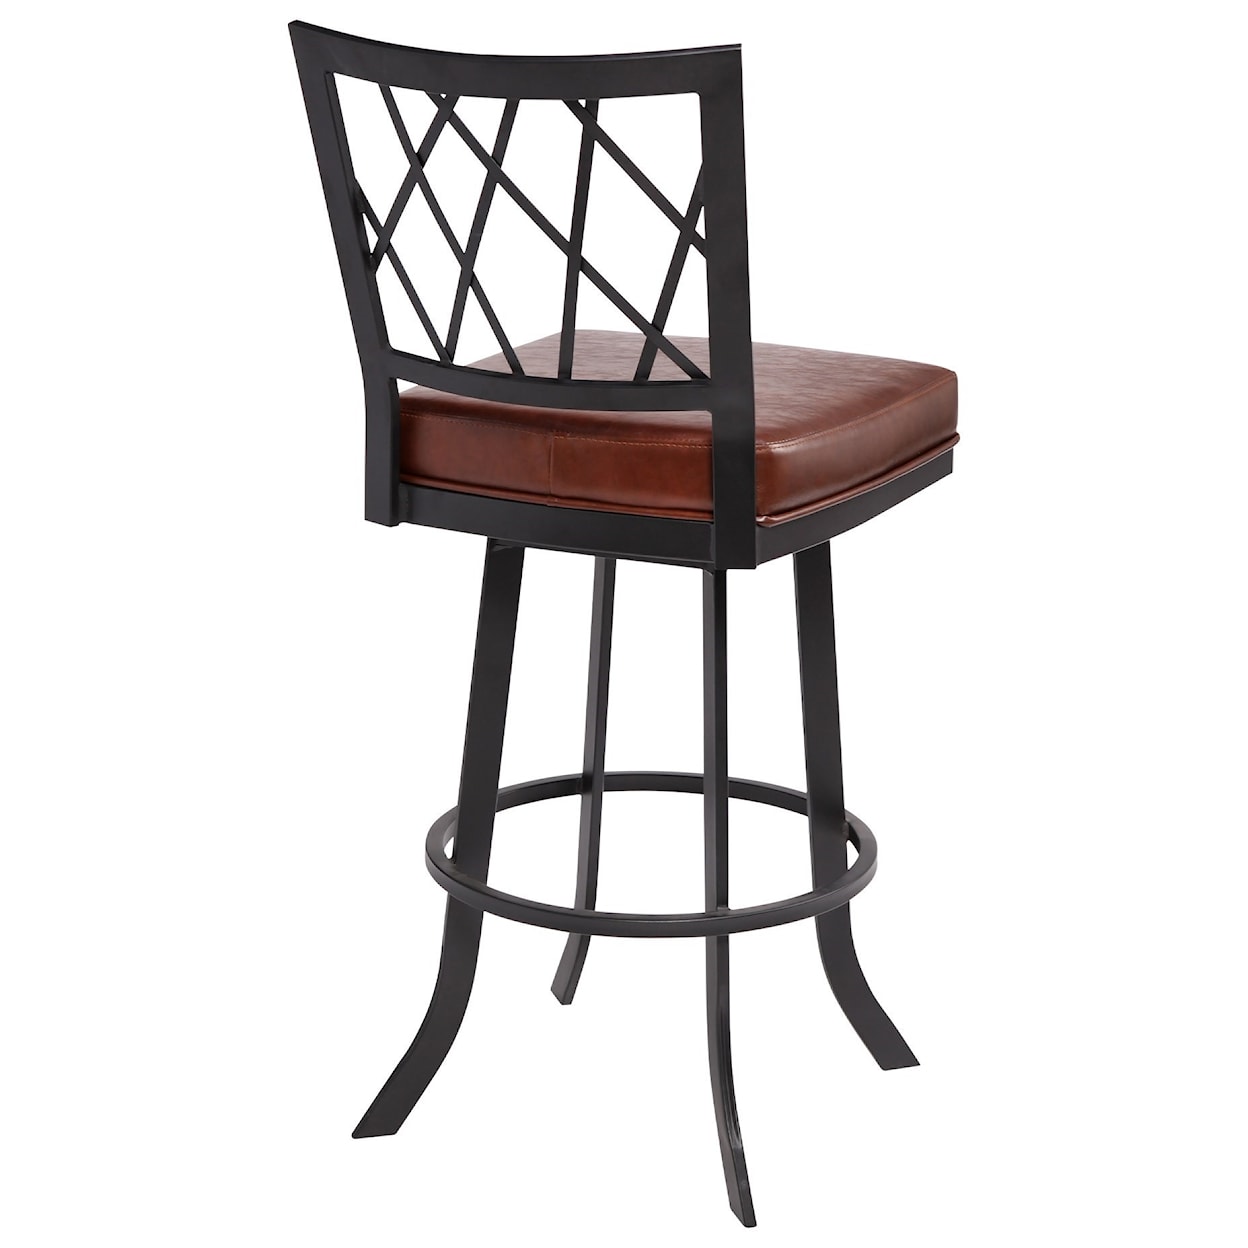 Armen Living Giselle Contemporary 26" Counter Height Barstool